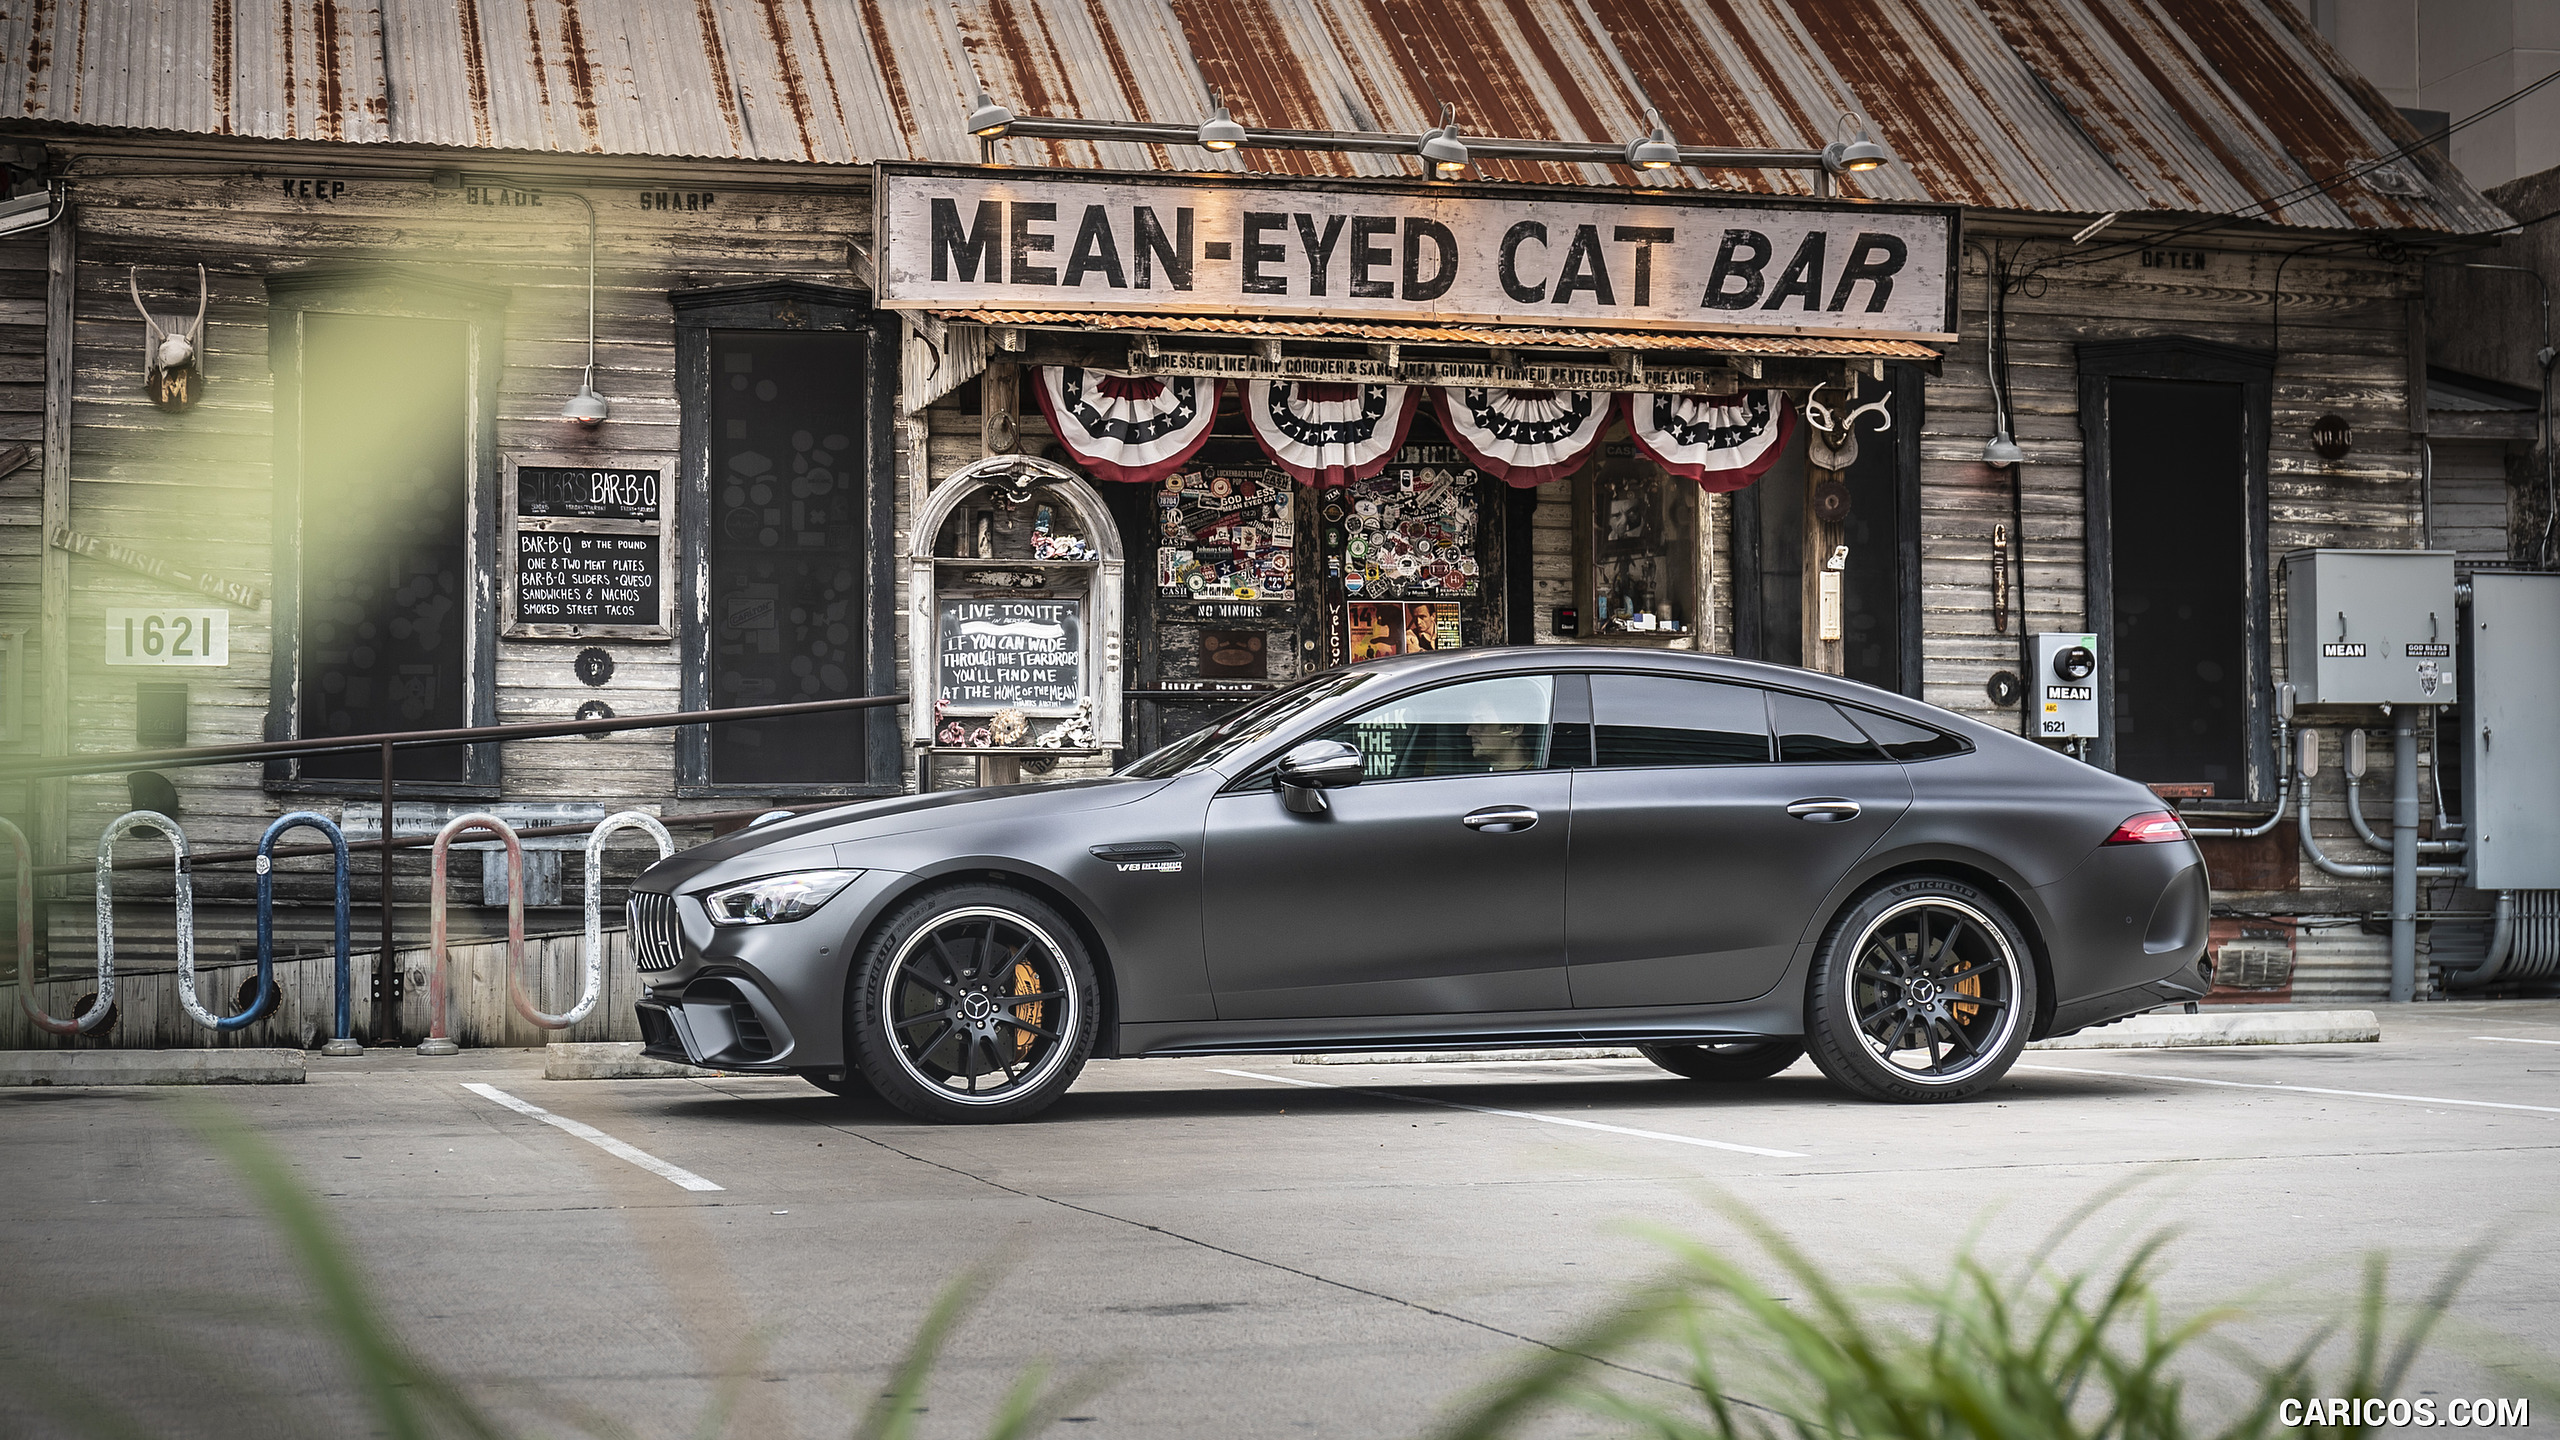 2019 Mercedes-AMG GT 63 S 4MATIC+ 4-Door Coupe - Side, #217 of 427